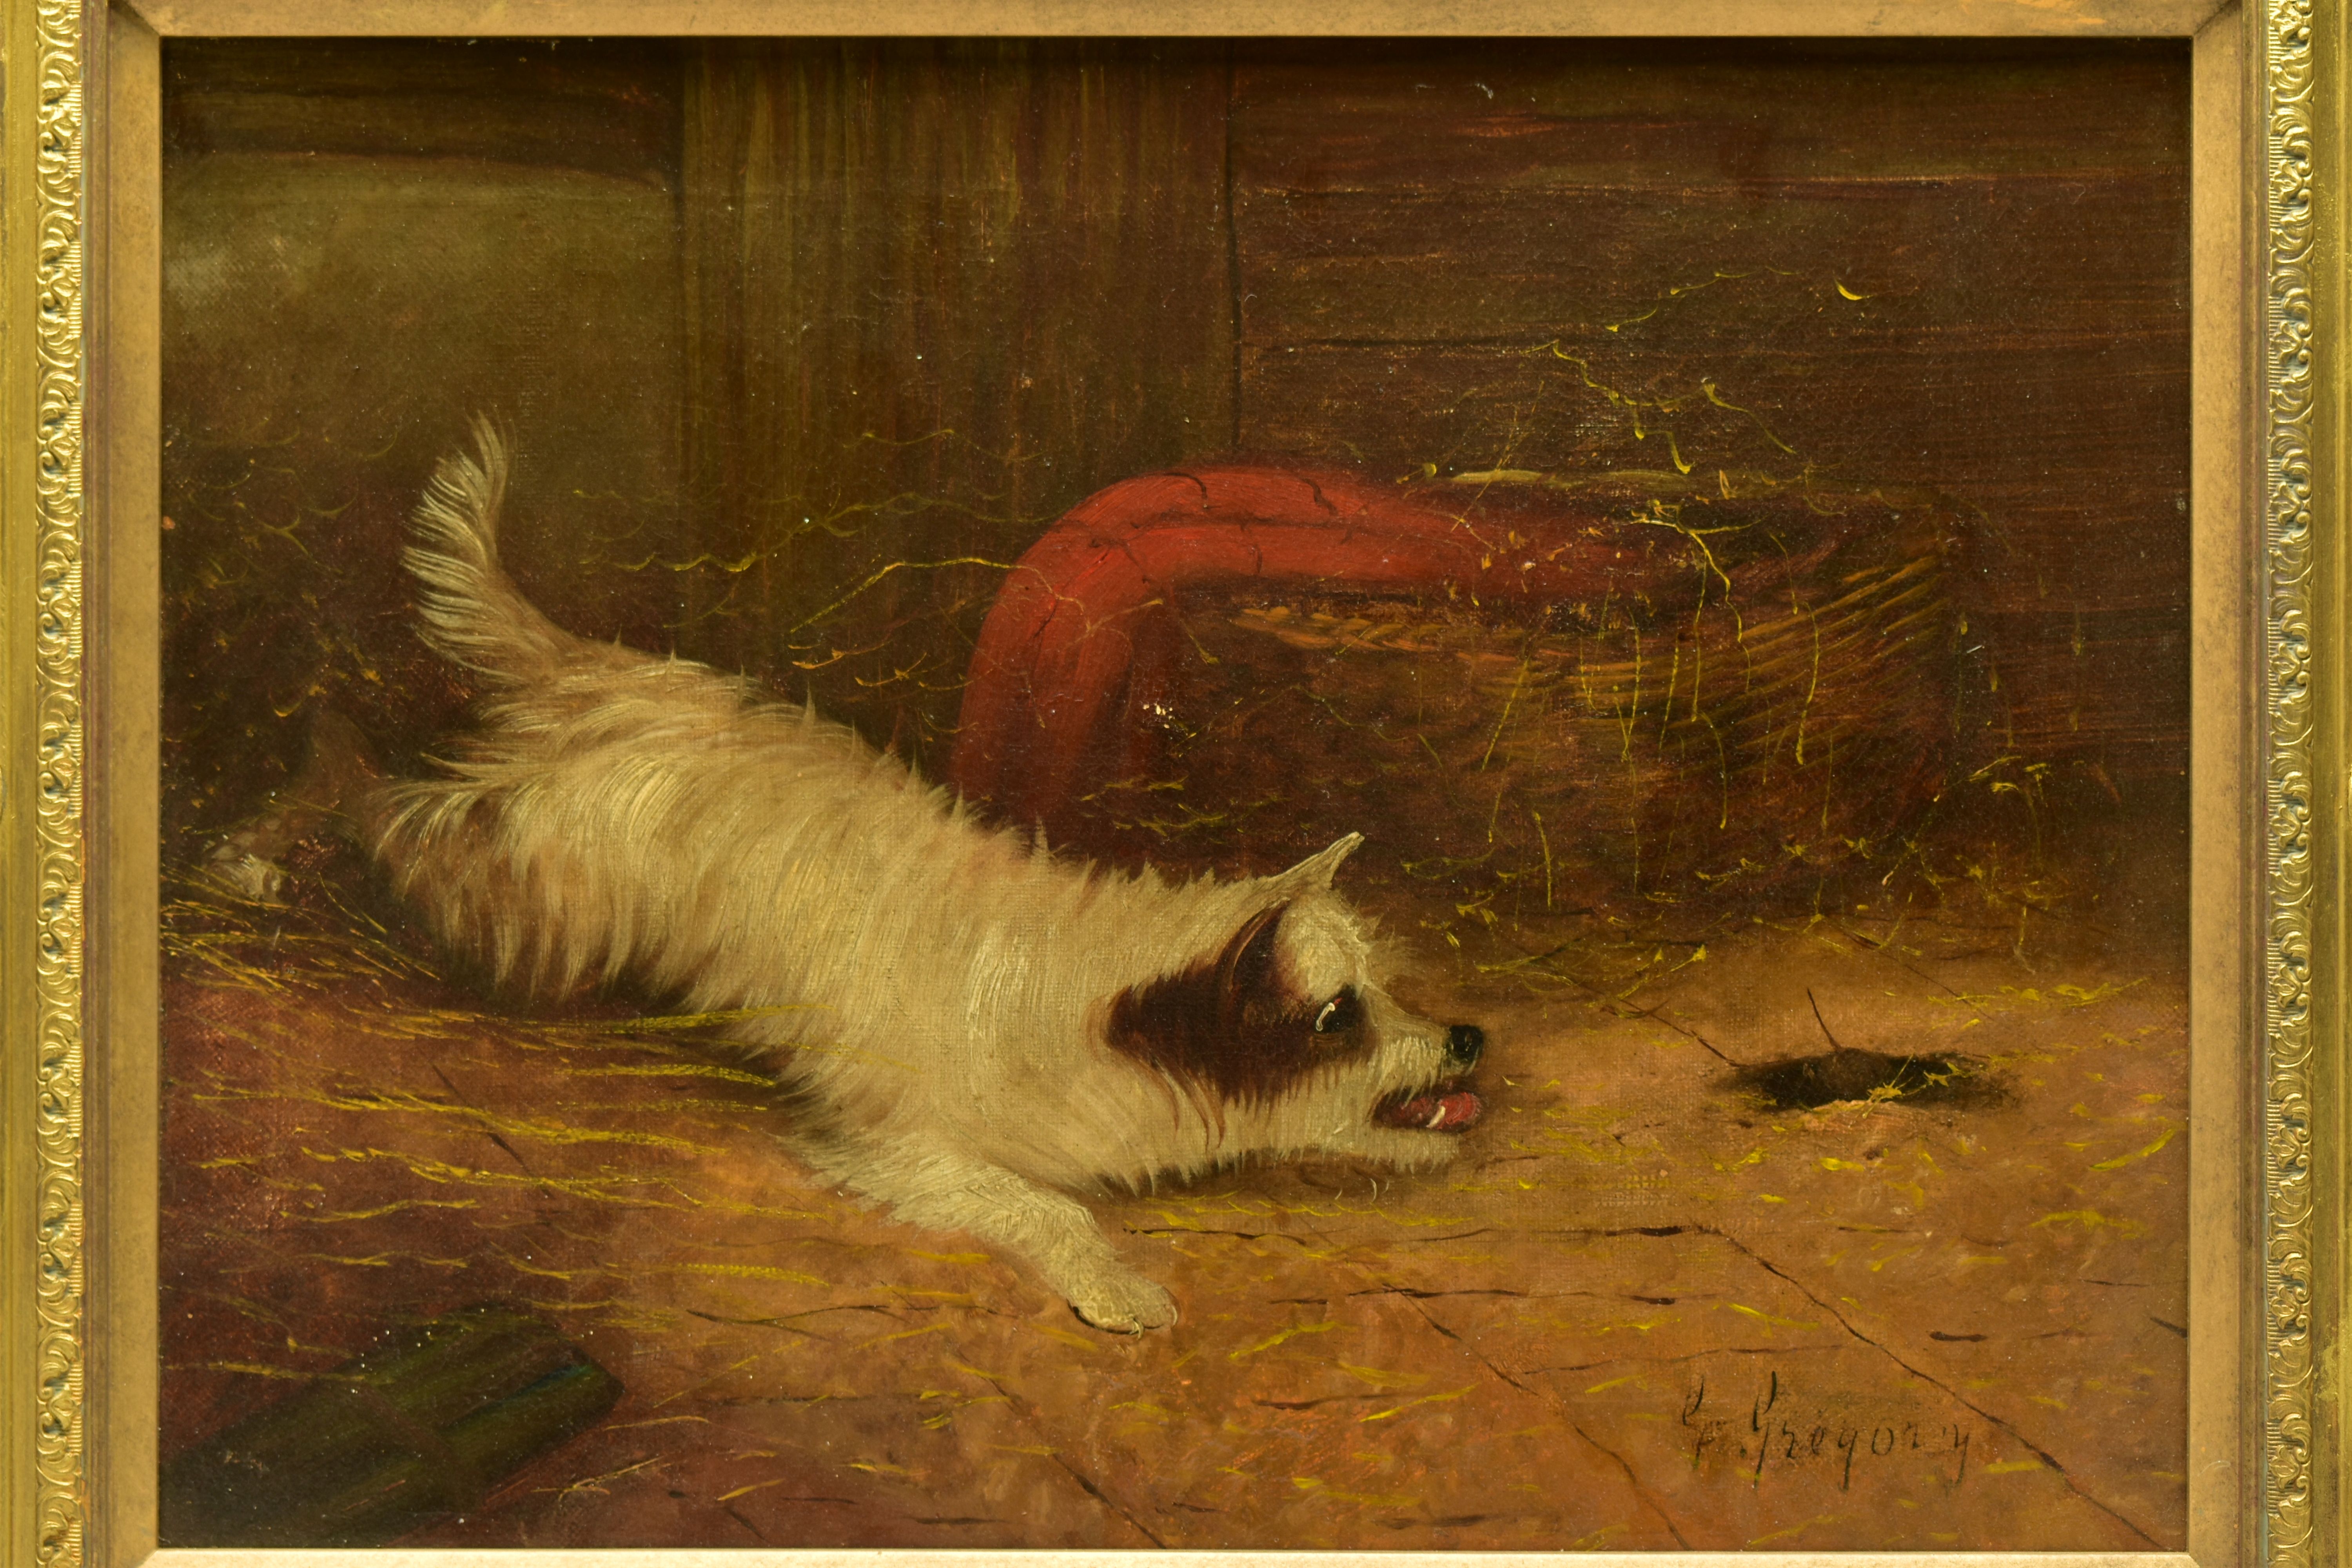 G. GREGORY (19THCENTURY) A TERRIER CHASING A RAT, a depiction of a terrier in a barn chasing a rat - Image 2 of 6